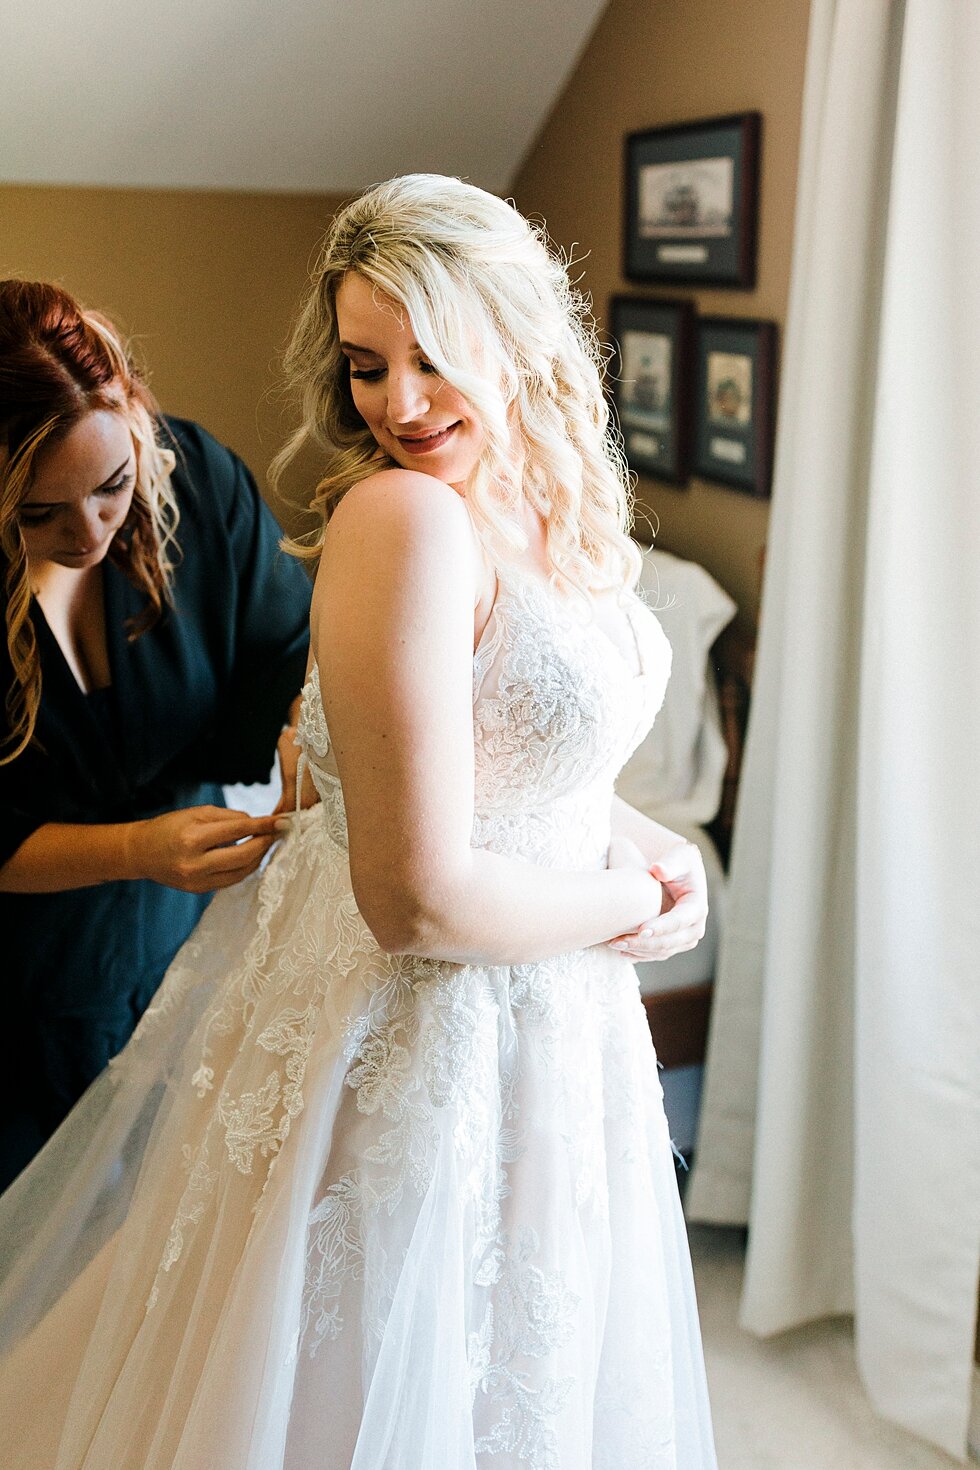  Adding the finishing touches as this beautiful bride prepares to walk down the aisle on her wedding day! Romantic casual lace wedding gown close friends neutral colors background wedding natural greenery crisp white #midwestphotographer #kywedding #